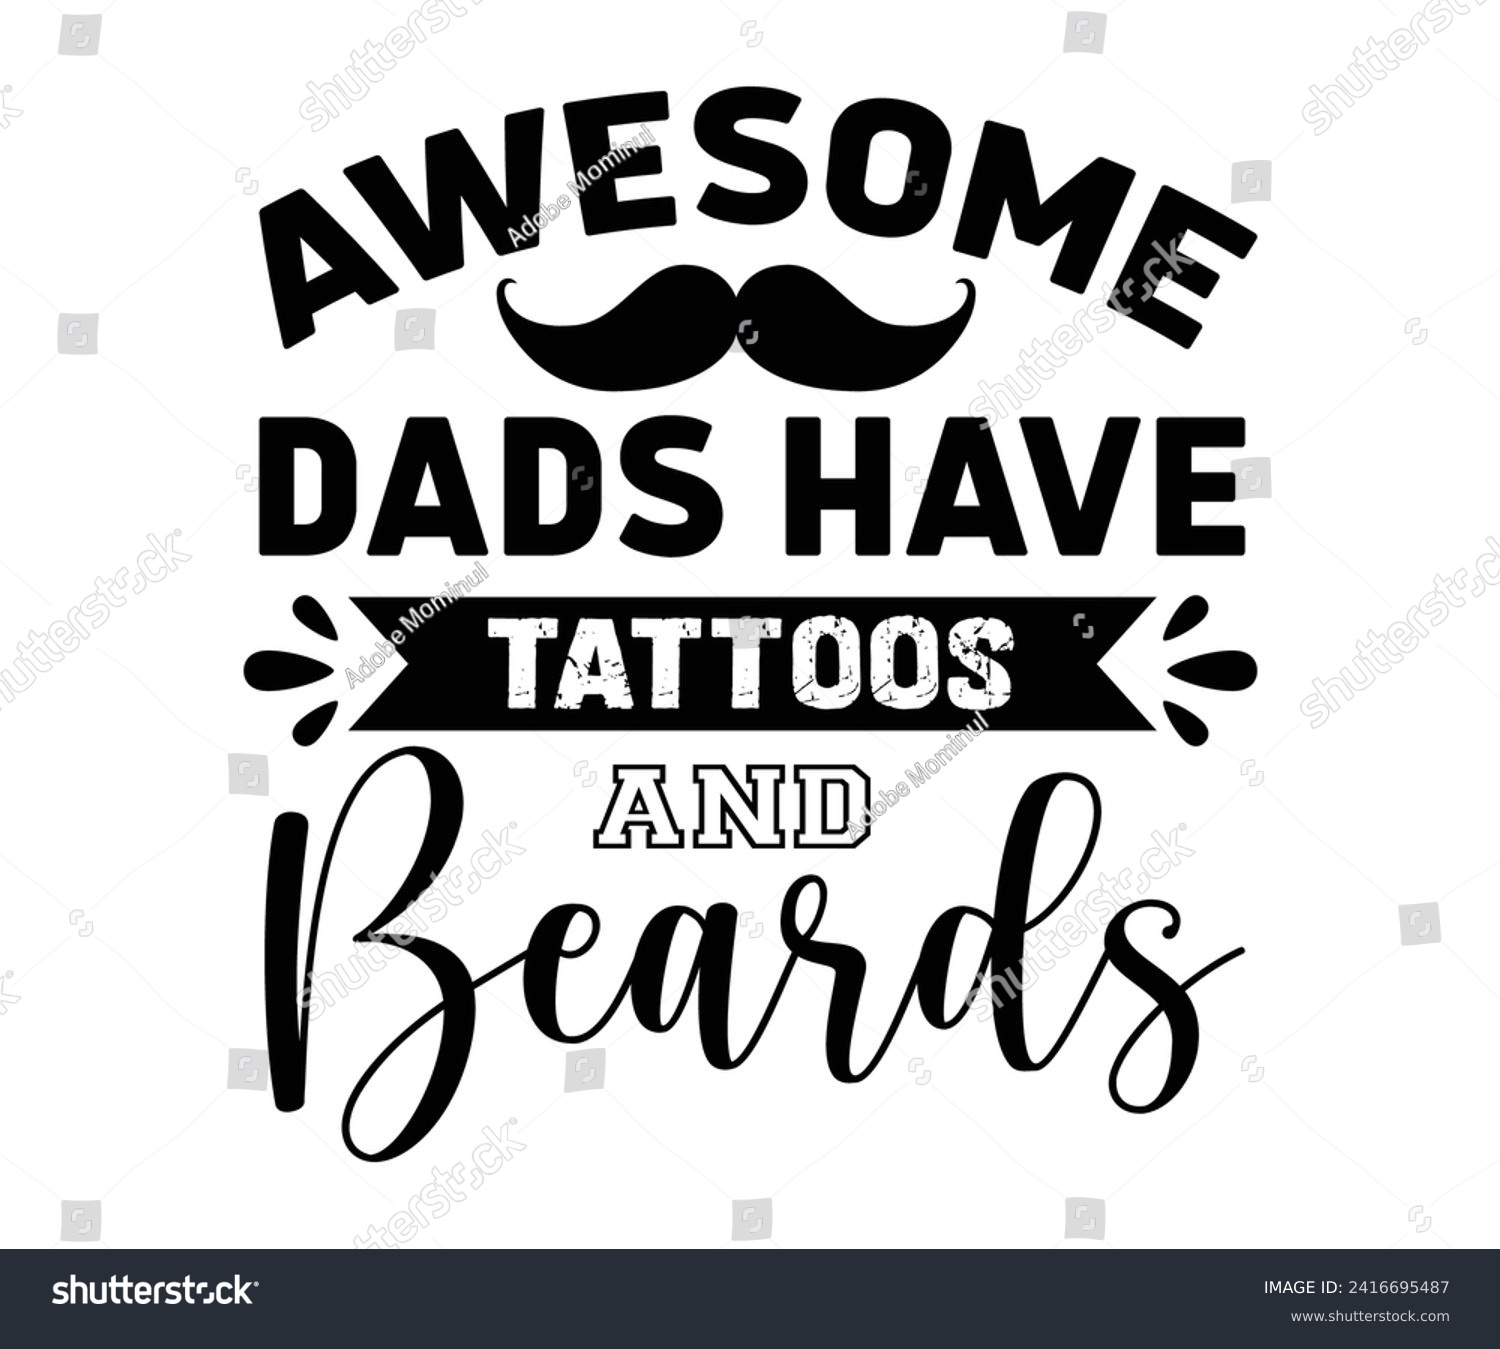 SVG of Awesome Dads Have Tattoos and Beards Svg,Father's Day Svg,Papa svg,Grandpa Svg,Father's Day Saying Qoutes,Dad Svg,Funny Father, Gift For Dad Svg,Daddy Svg,Family Svg,T shirt Design,Cut File,Typography svg